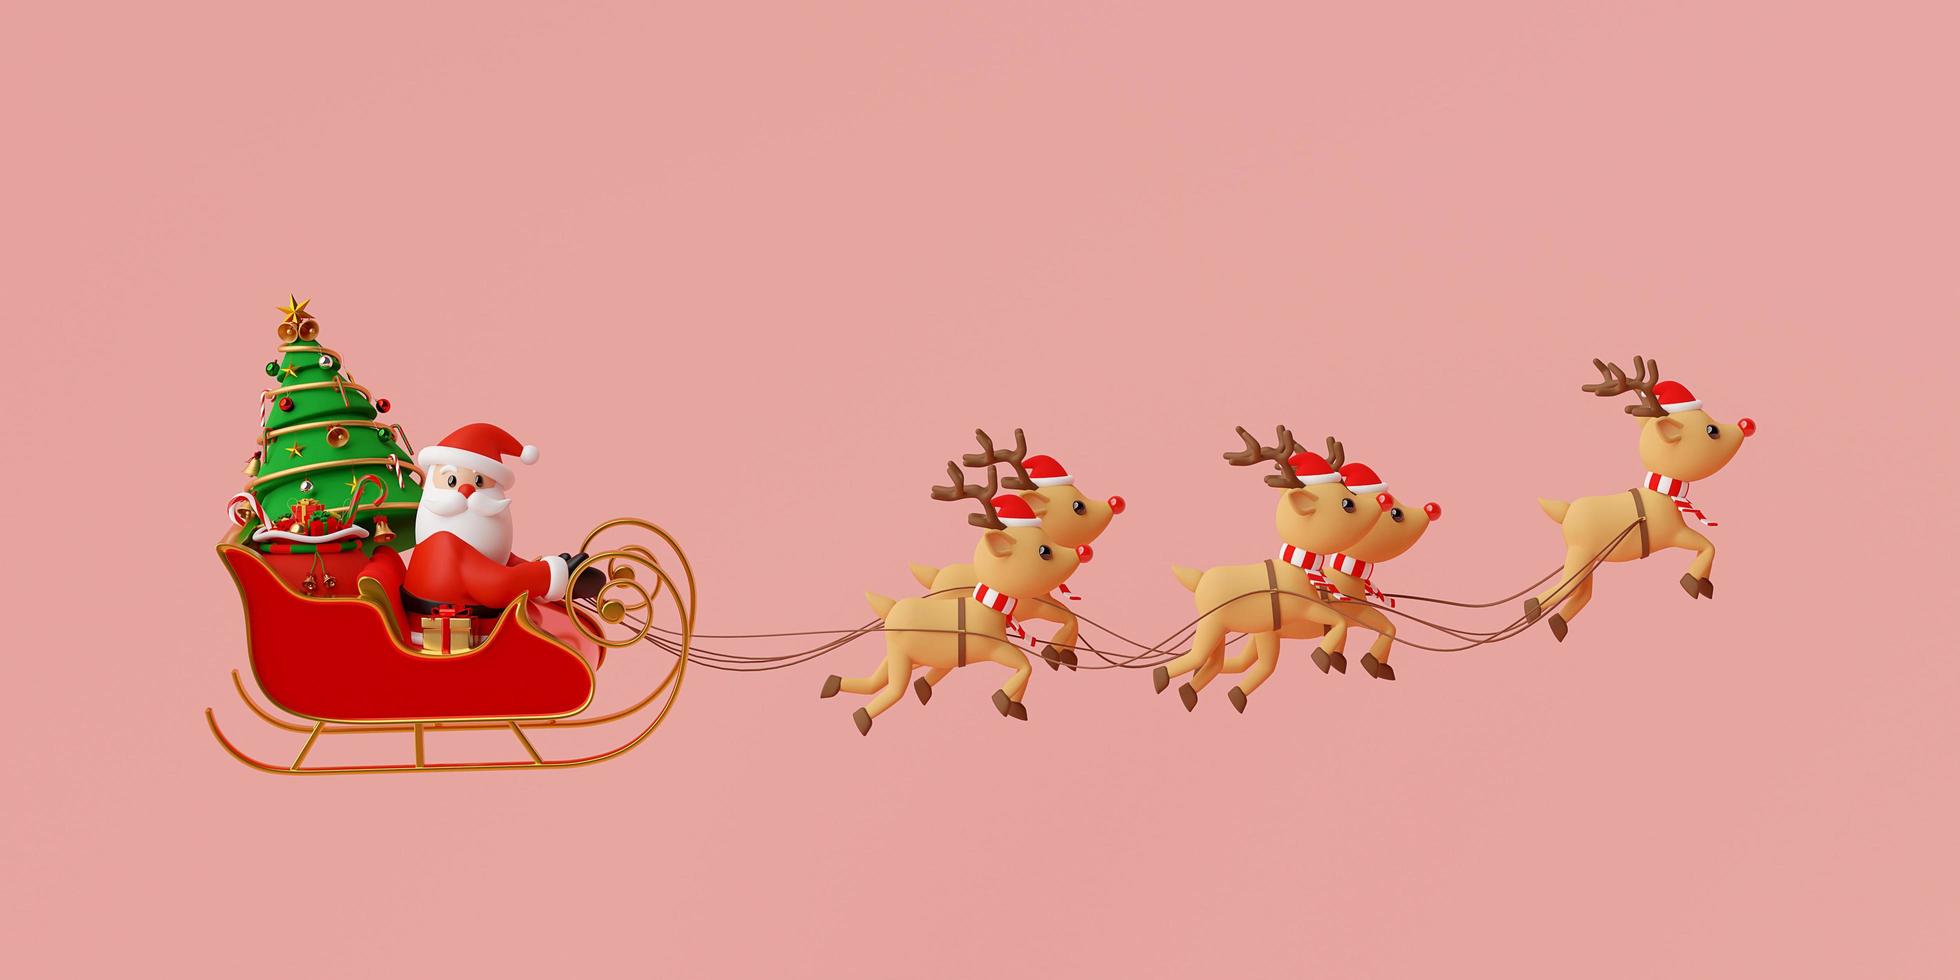 Merry Christmas and Happy New Year, Santa Claus on a sleigh full of Christmas gifts and pulled by reindeer, 3d rendering photo